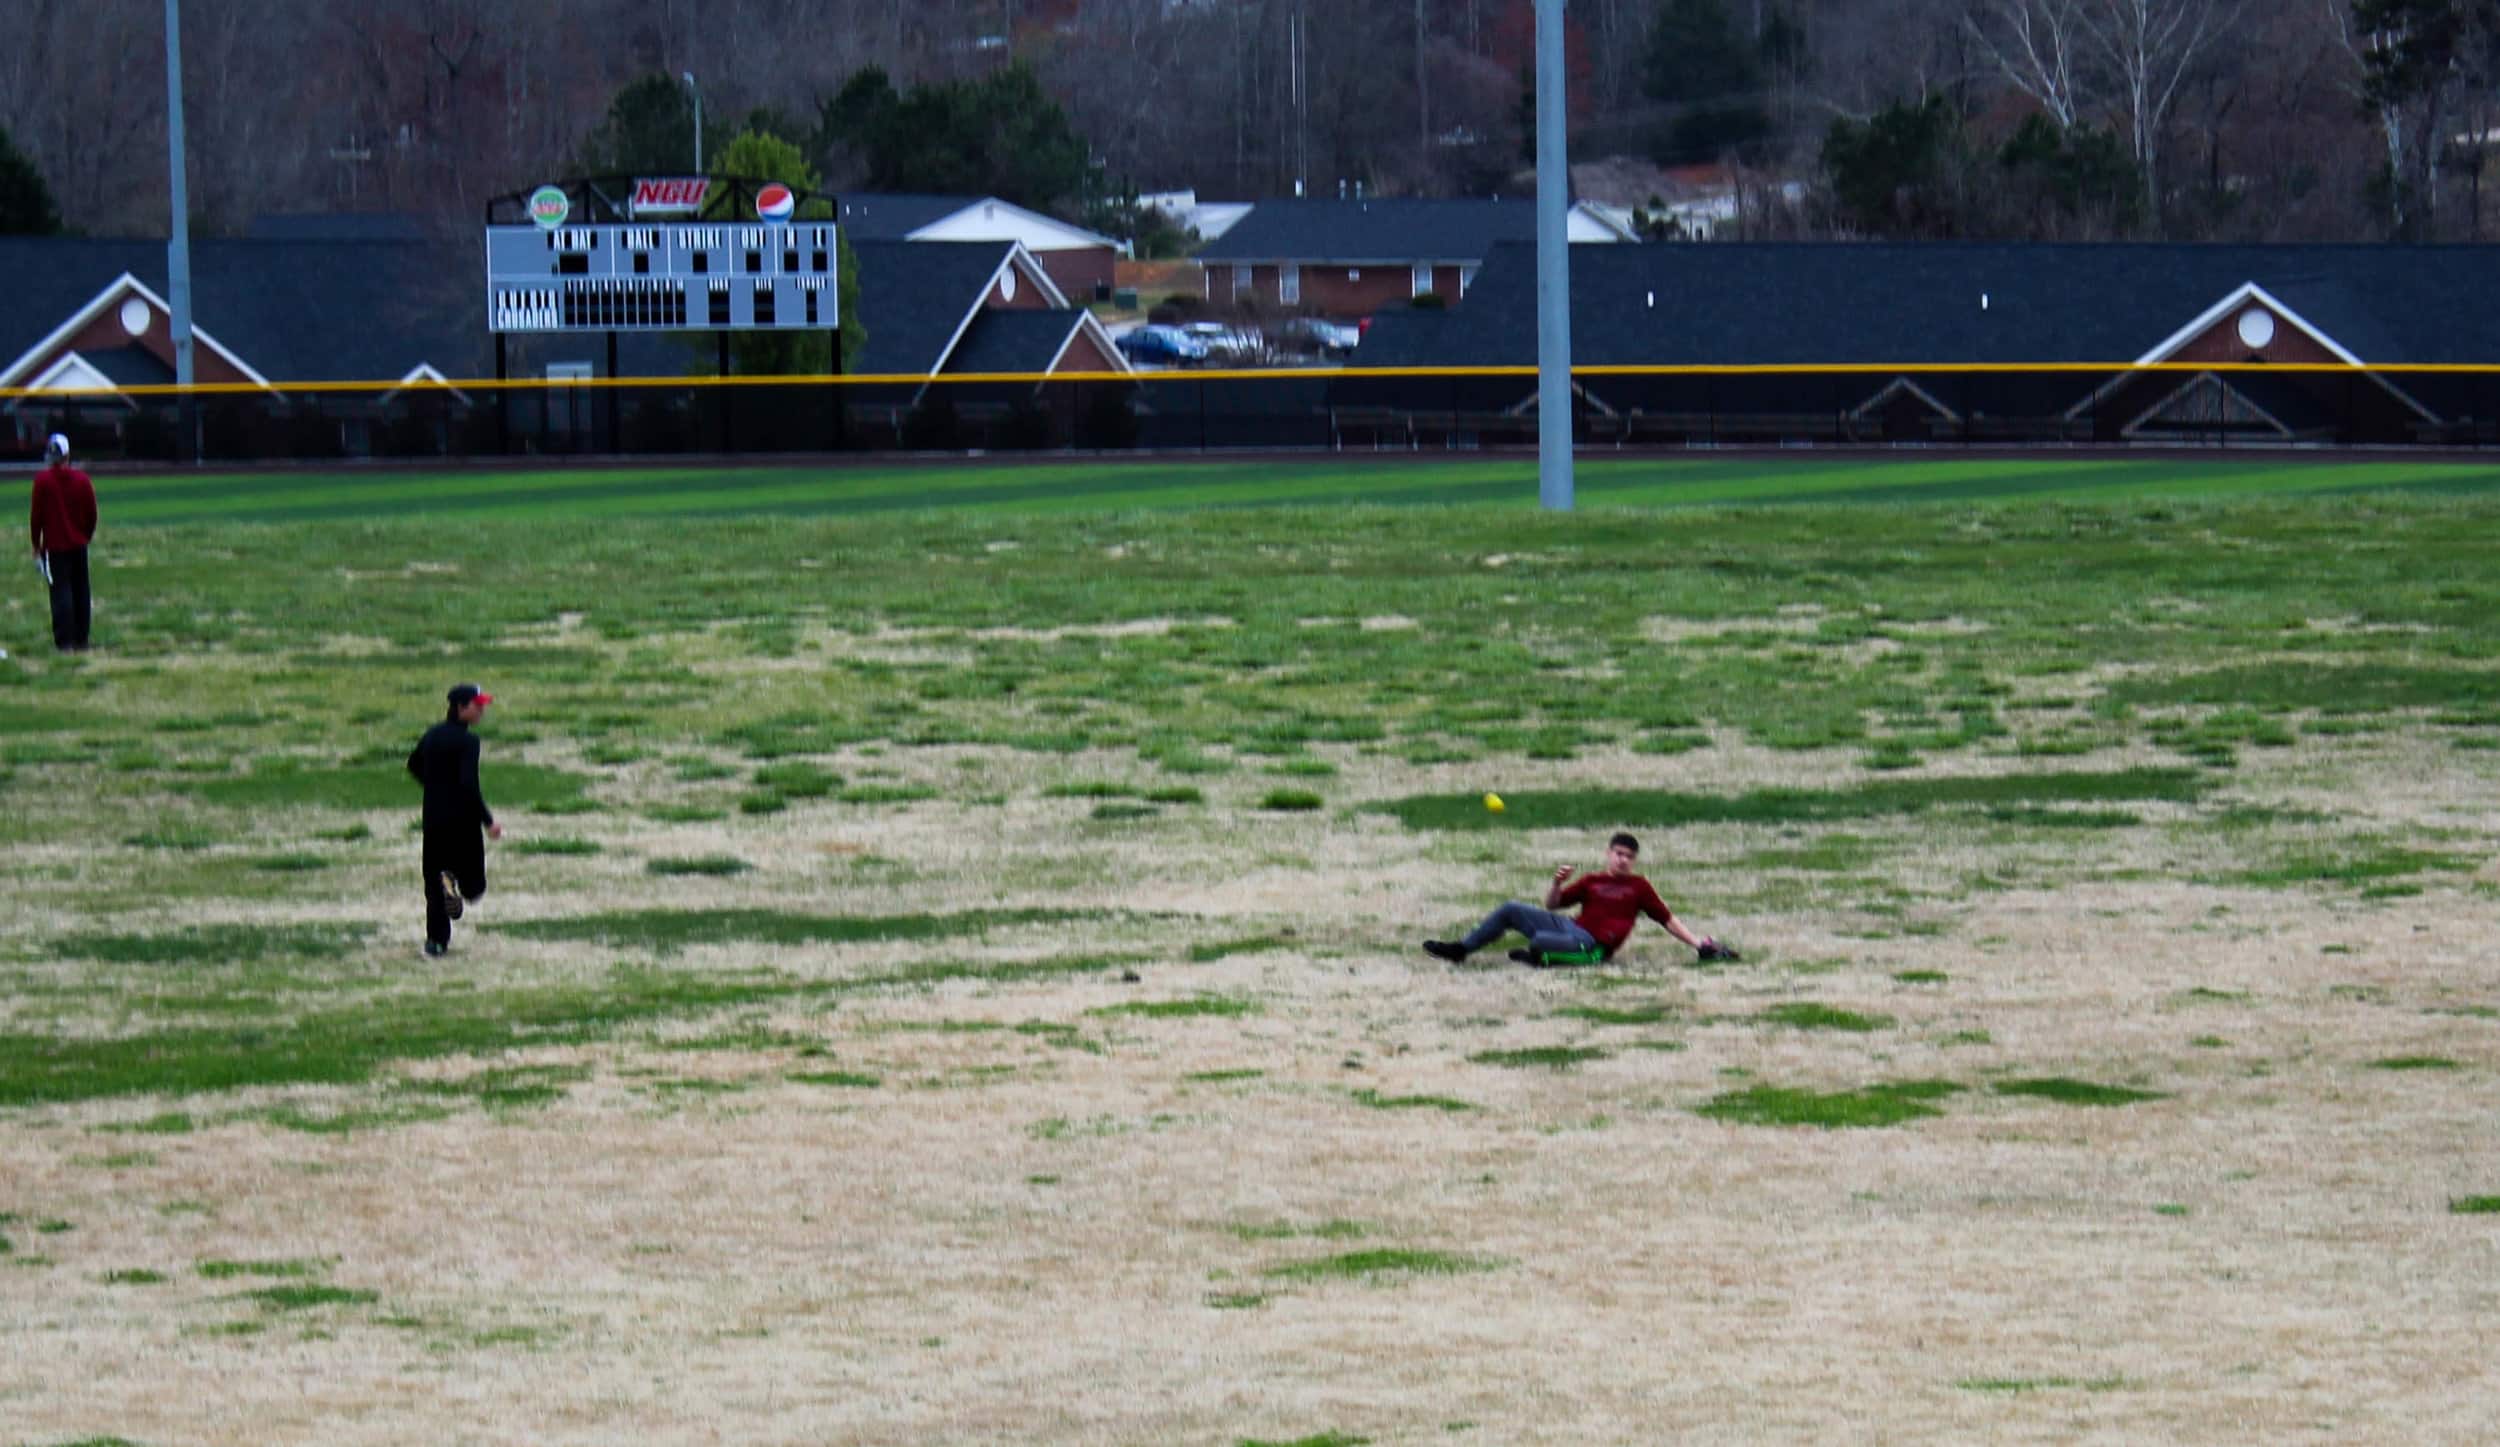 Austin Pittillo slides through the outfield hoping to get under the ball hit towards him.